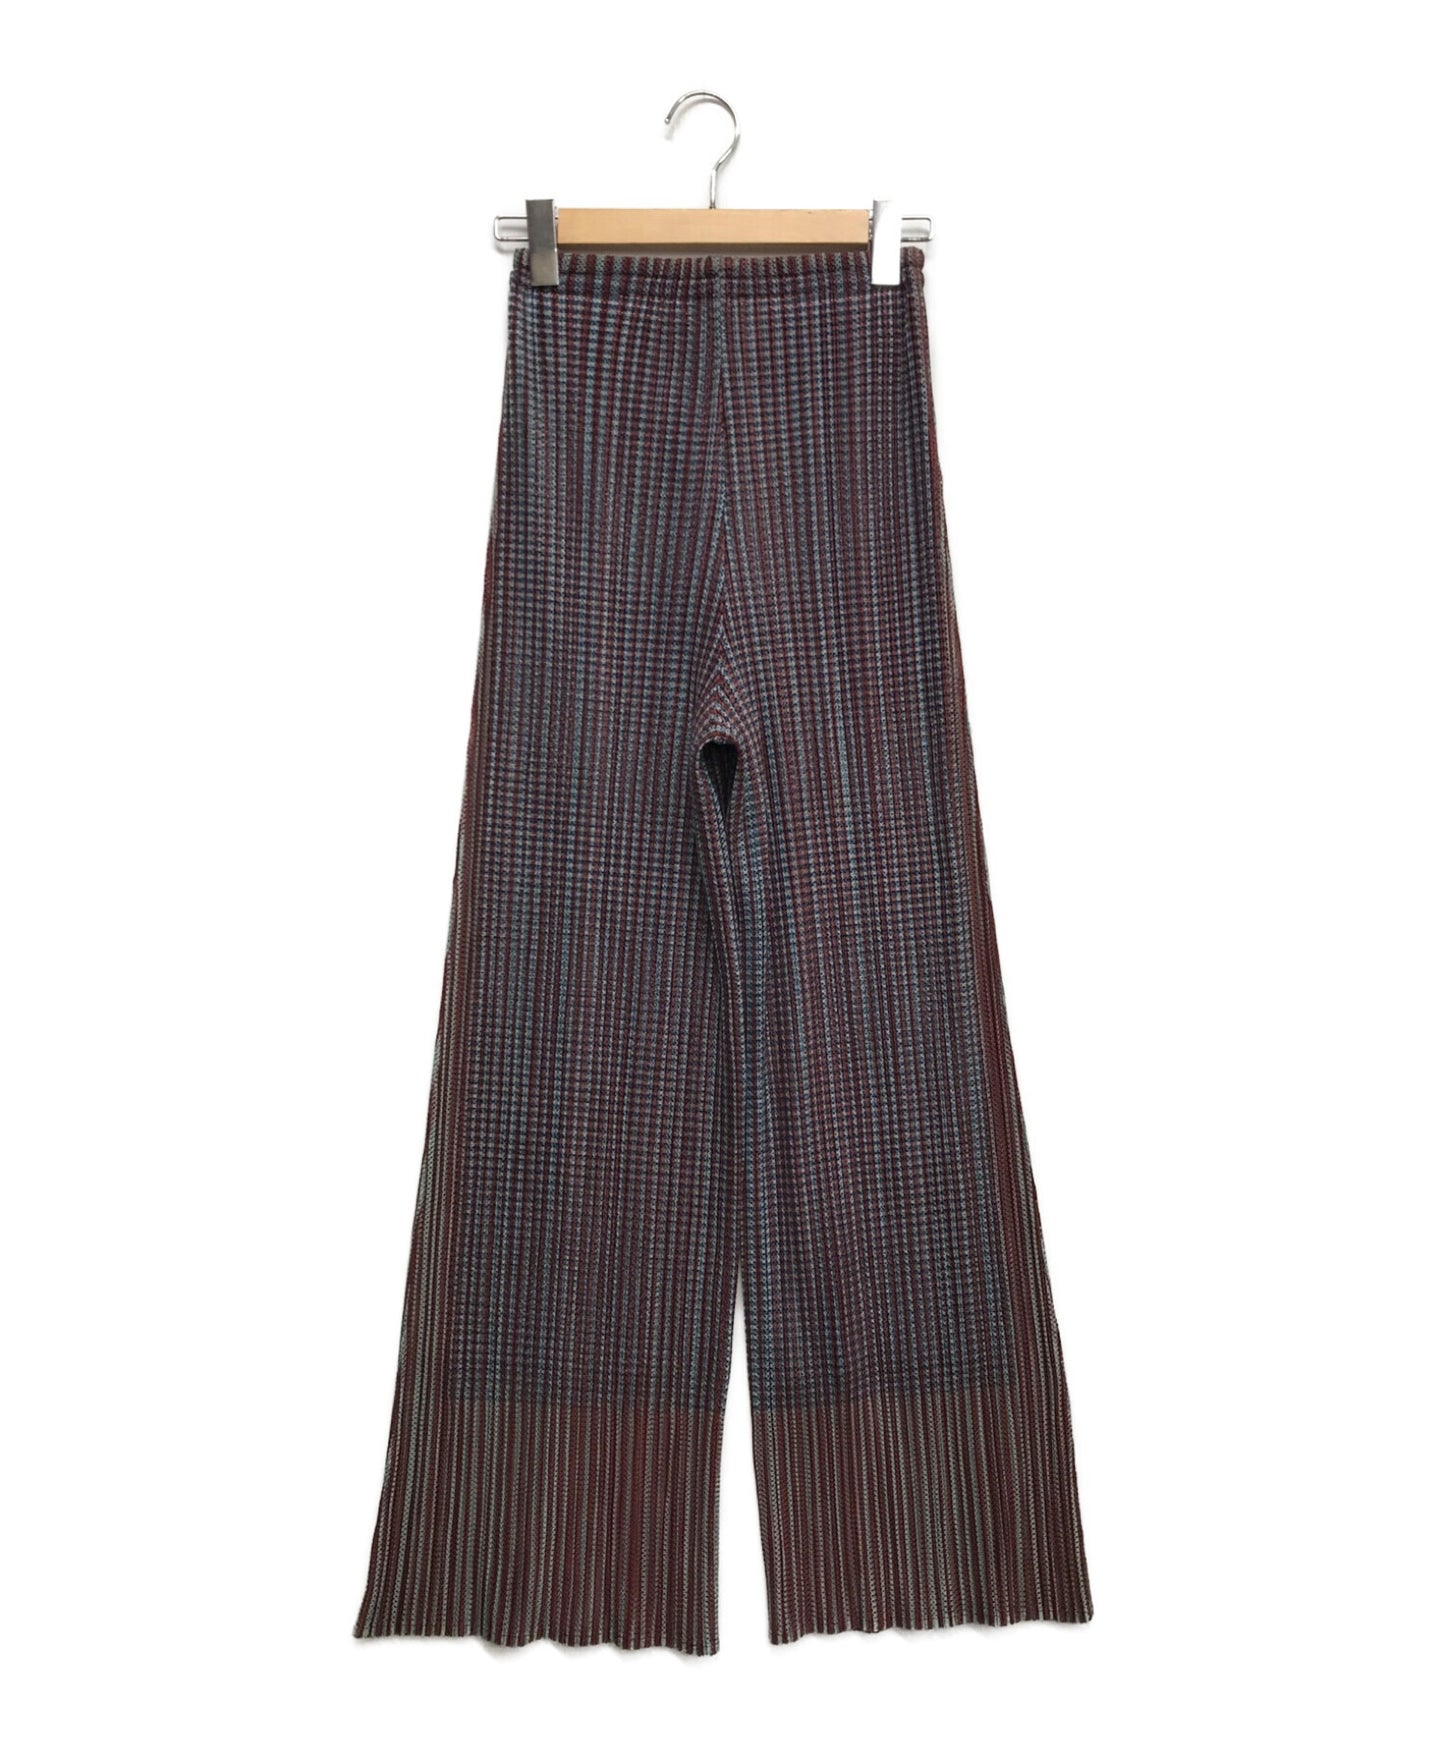 [Pre-owned] PLEATS PLEASE Mesh Check Pleated Pants Pants Bottoms PP14-JF164